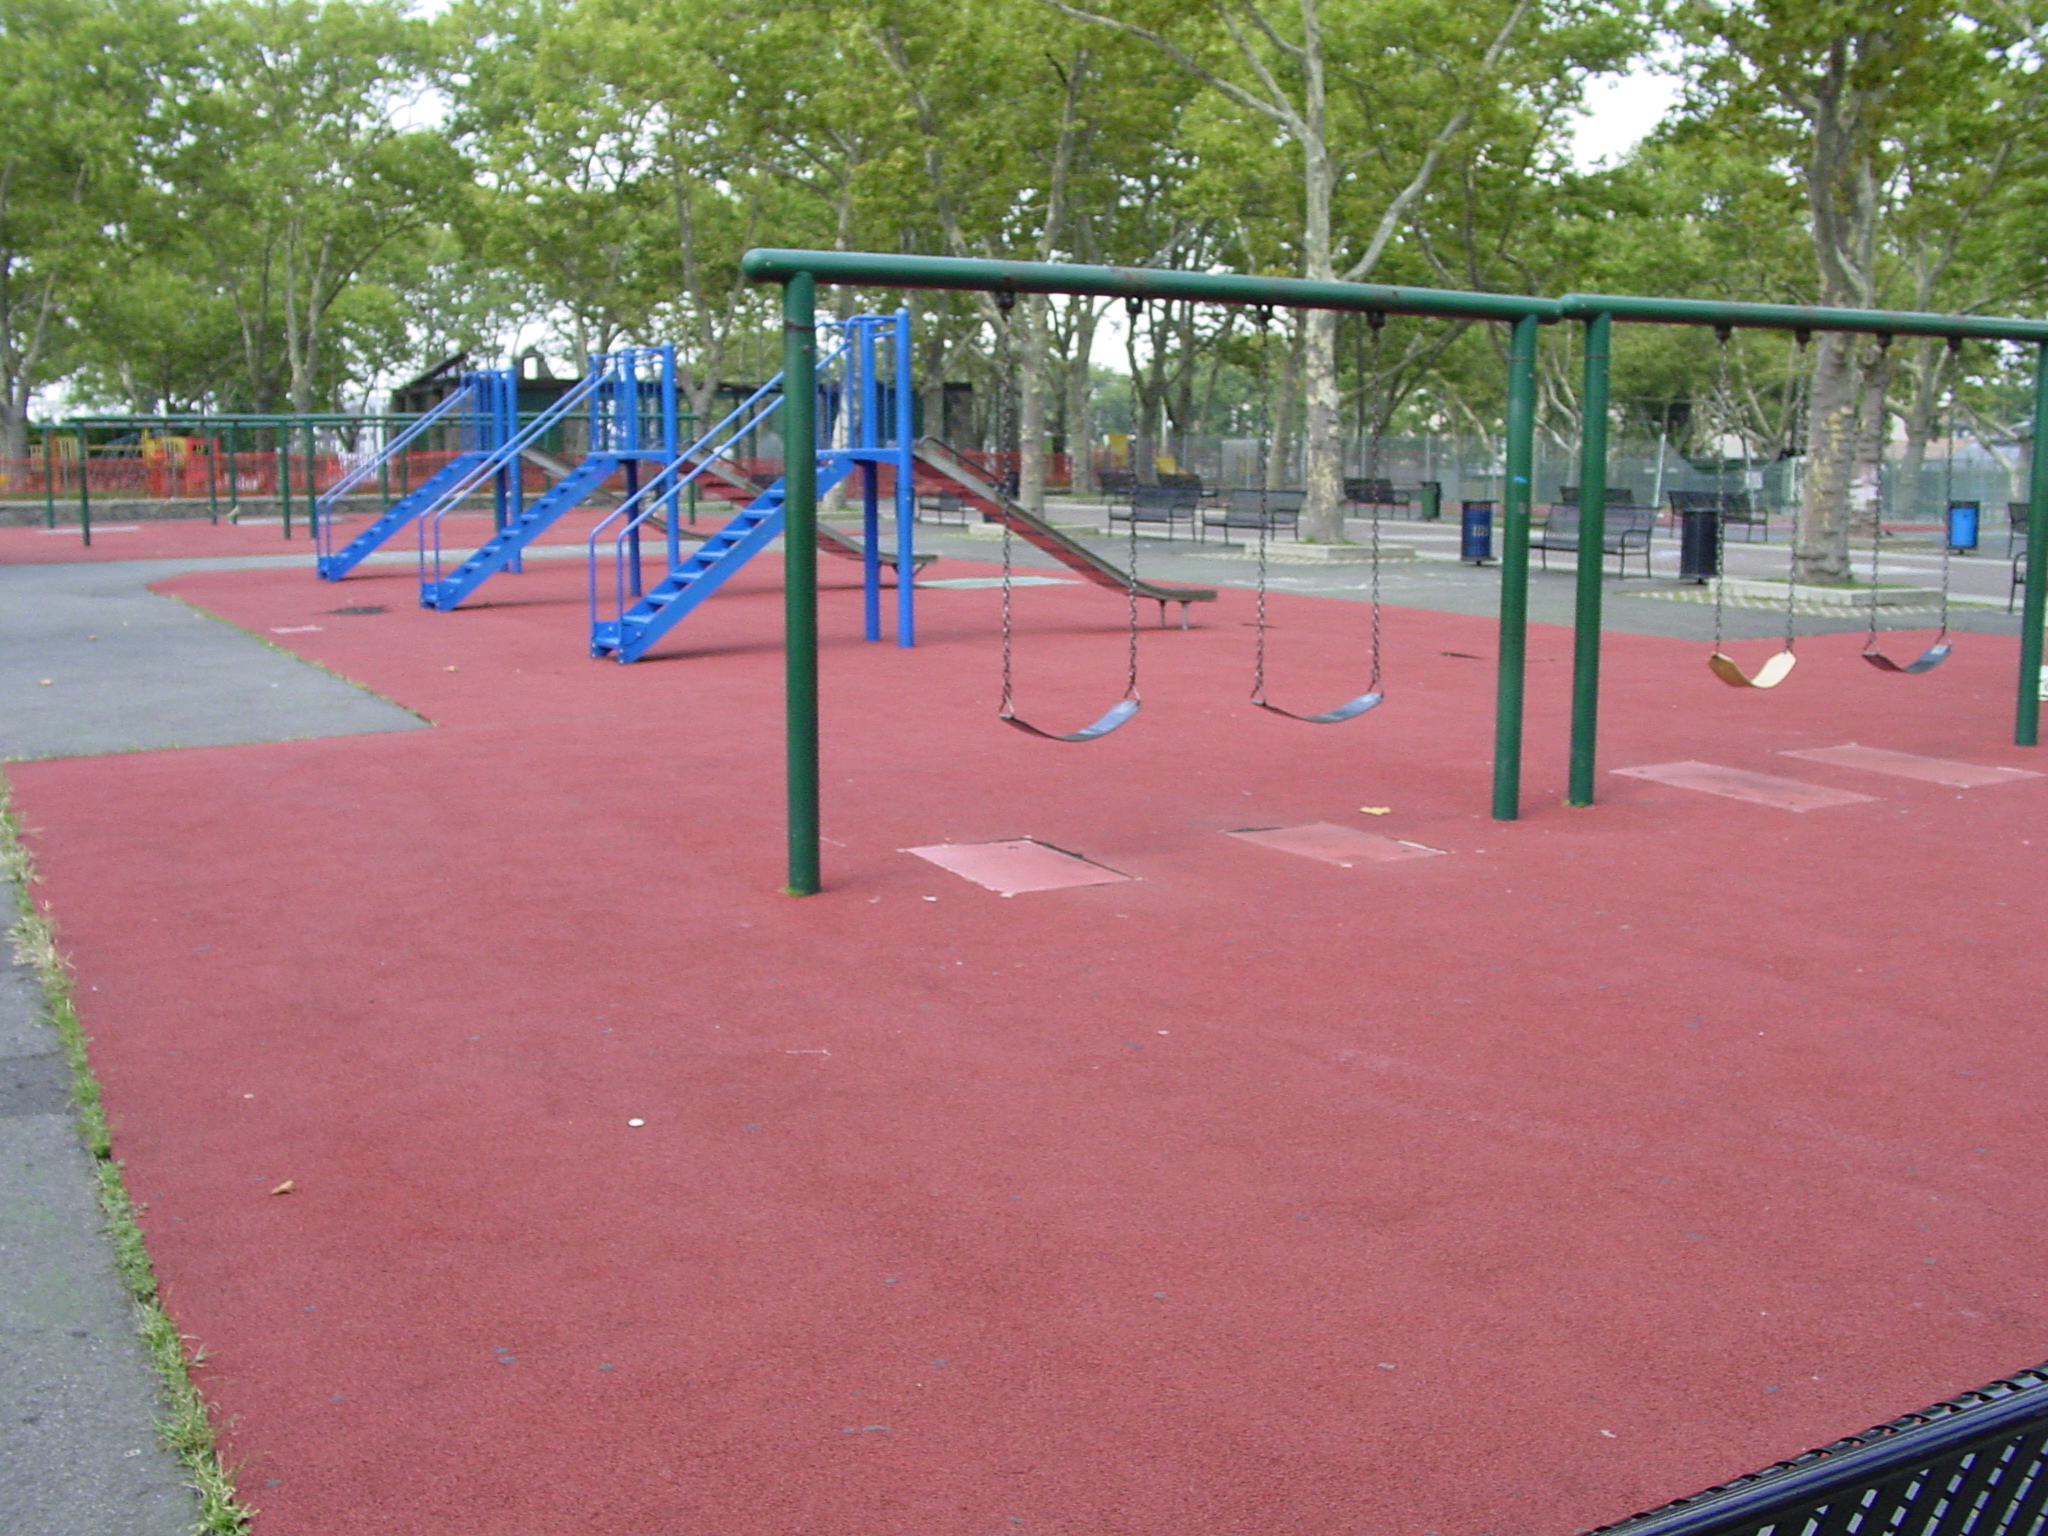 Large Public Park with Multiple Playgrounds Using Designs o